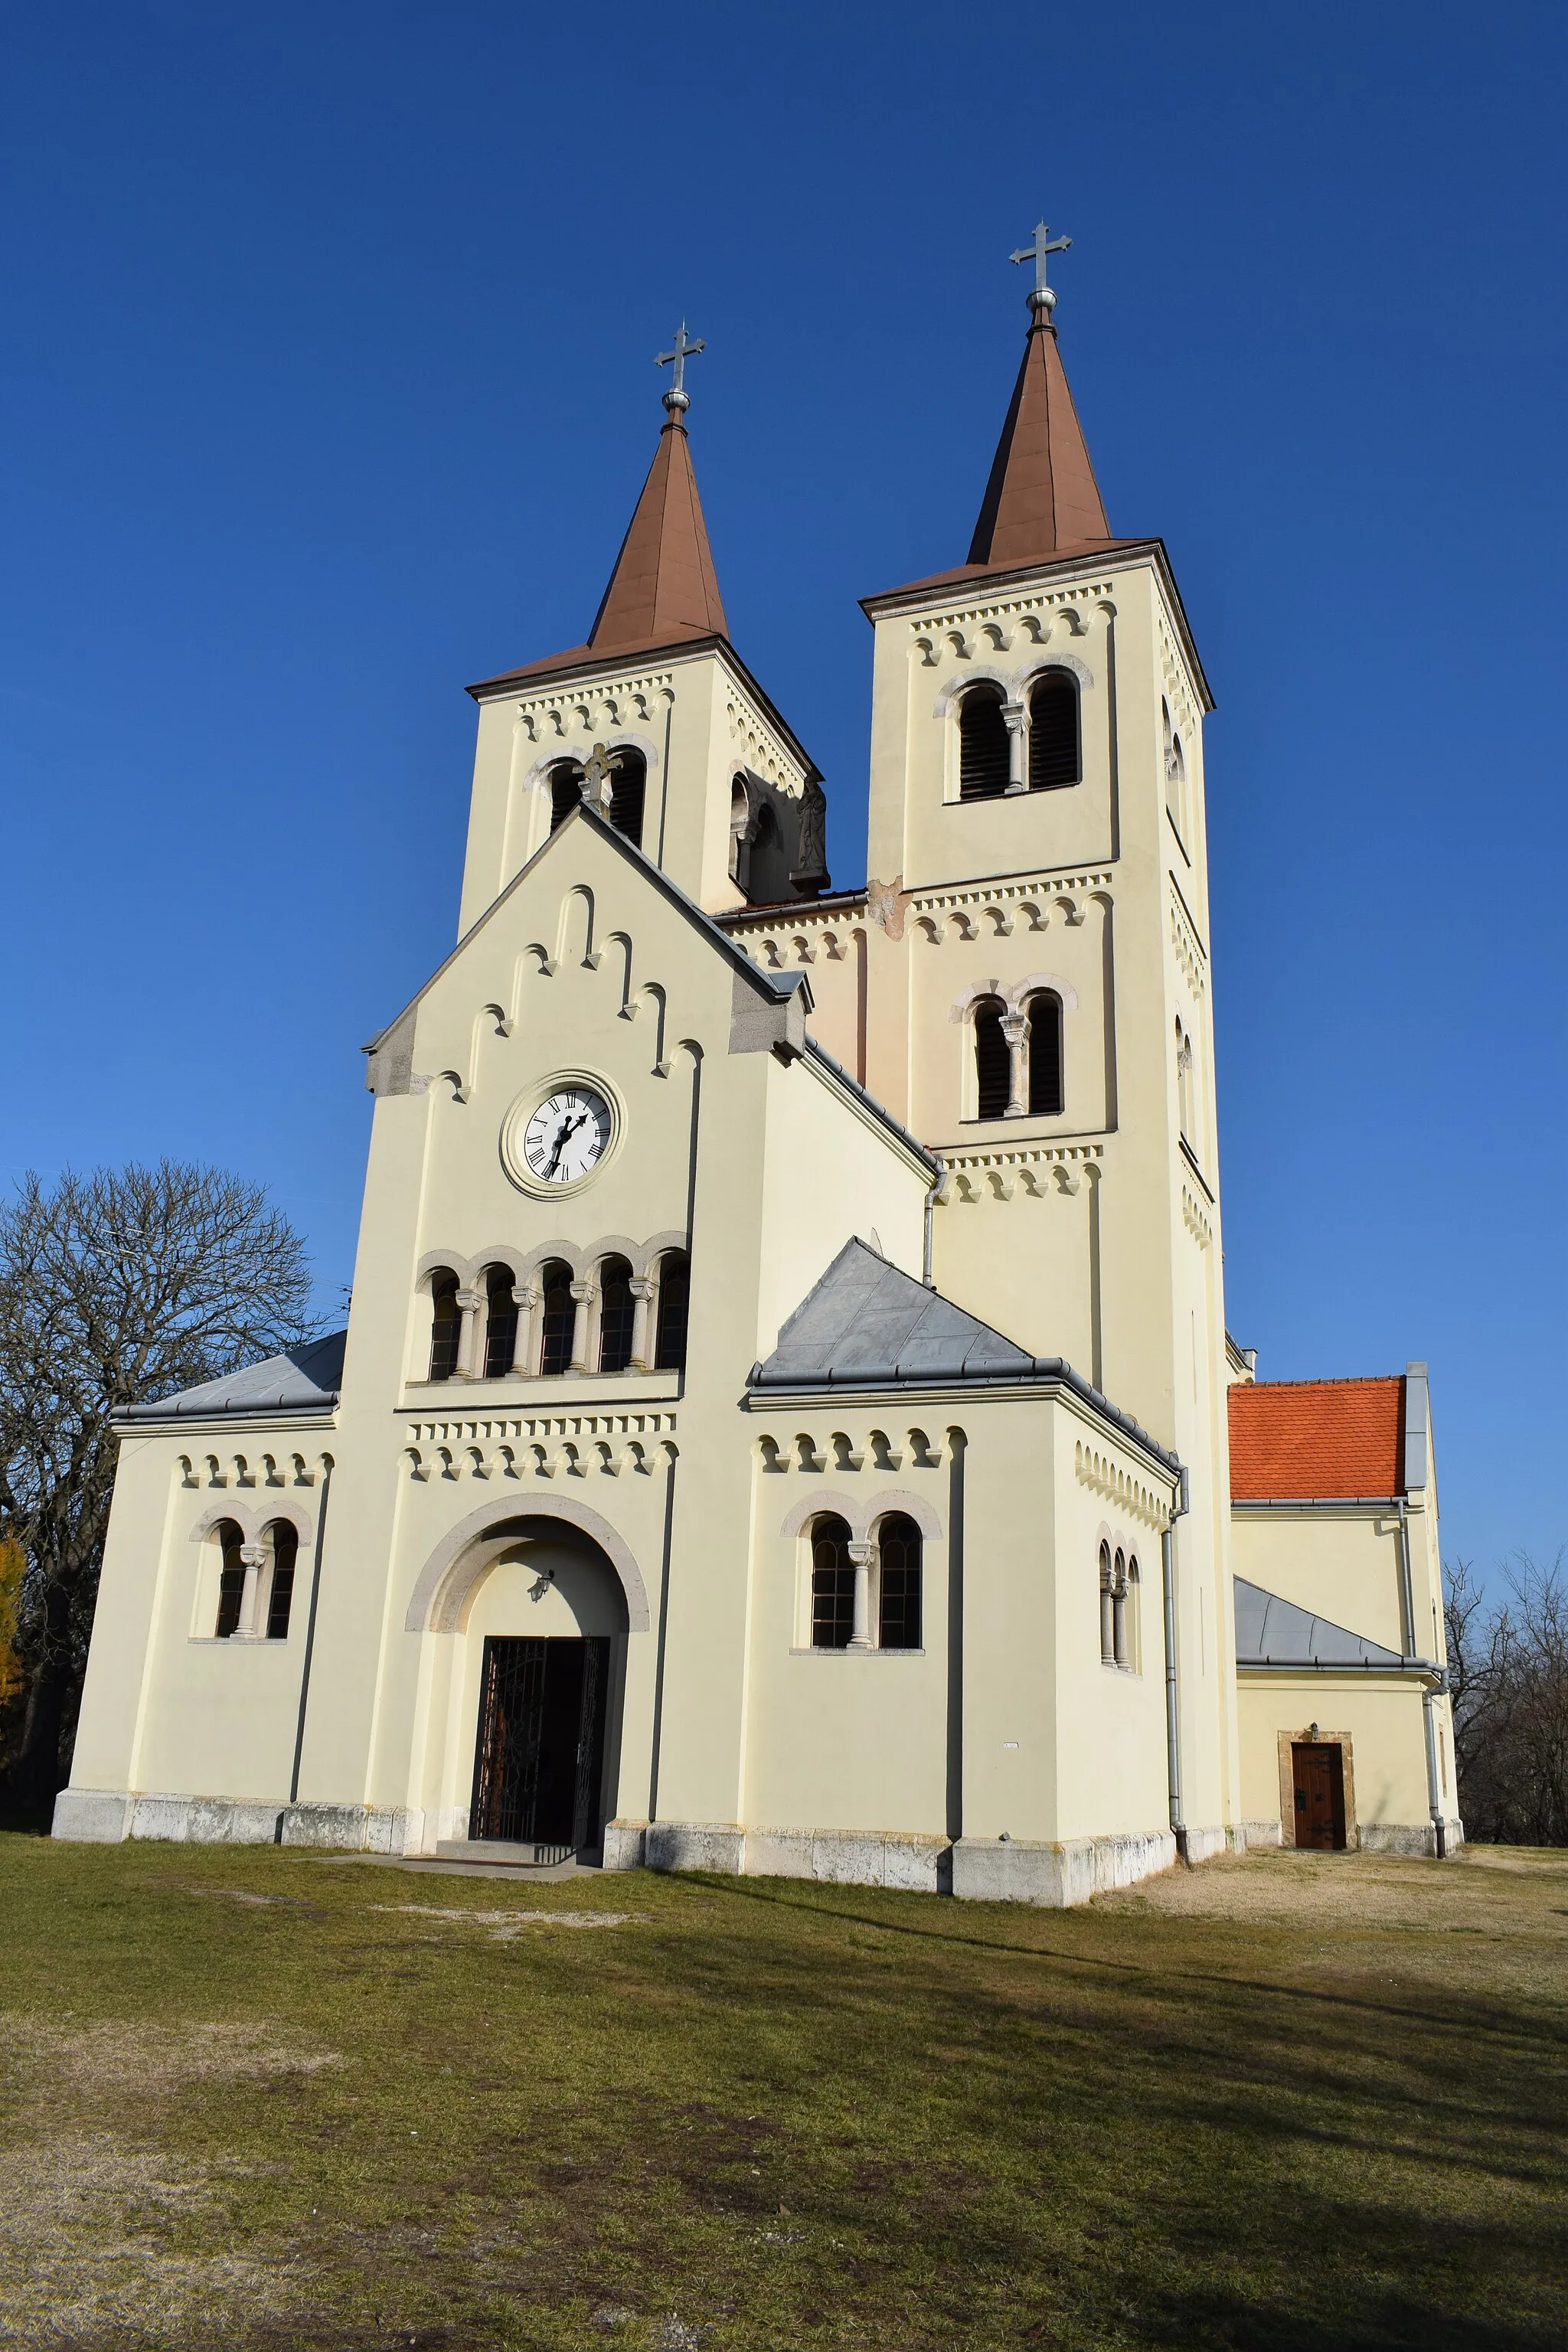 Photo showing: The Romanesque Church of the Virgin Mary in Bíňa, originally built as part of the now defunct monastery of Premonstratensians sometime before 1217, restored and altered substantially several times, especially in 1722-32, 1861-62, 1896-98 and after significant damage in WW2 in 1951-55.